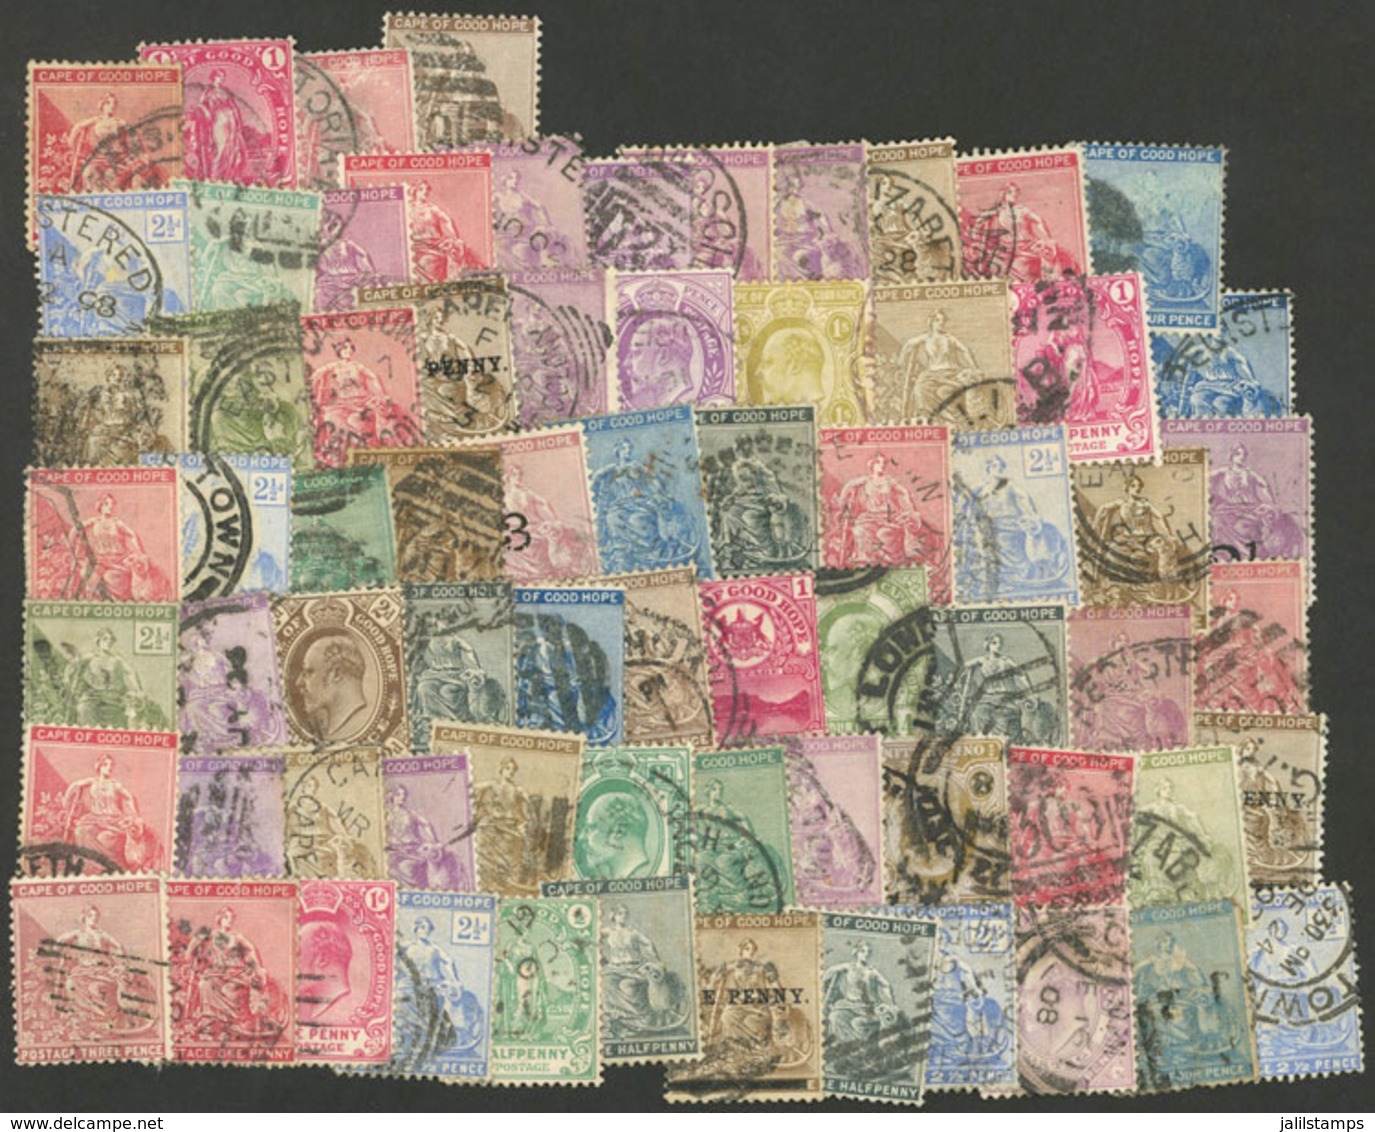 CAPE OF GOOD HOPE: Lot Of Old Stamps, Used, Perfect To Look For Varieties And Scarce Cancels, Very Fine General Quality! - Kaap De Goede Hoop (1853-1904)